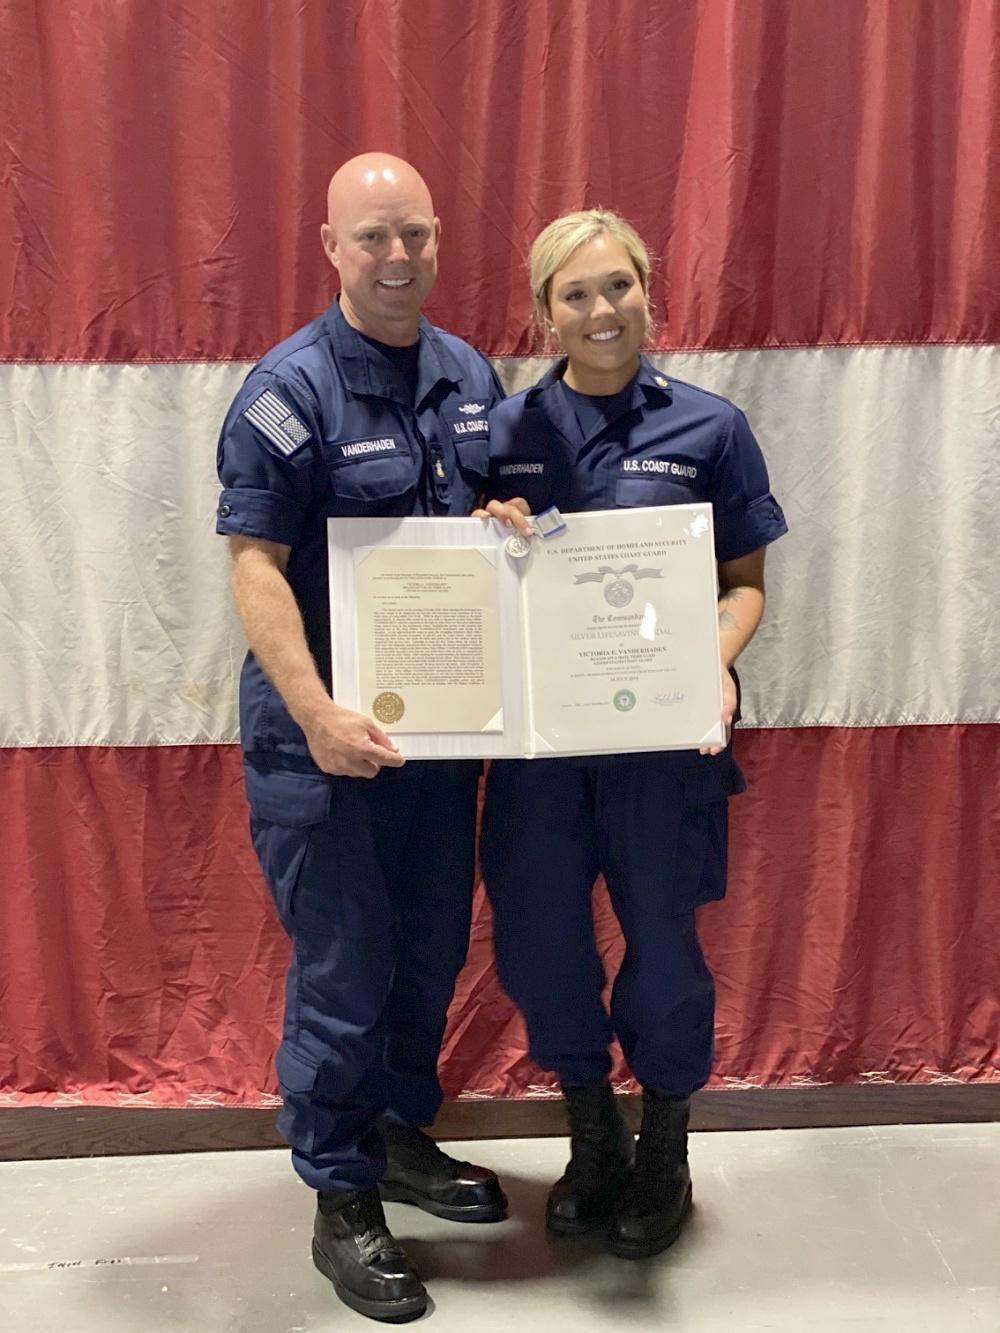 Master Chief Petty Officer Jason M. Vanderhaden with his daughter, Petty Officer 2nd Class Victoria Vanderhaden, in Mobile, Alabama, on July 20, 2020 (<a href="https://www.dvidshub.net/image/6280760/coast-guard-member-receives-silver-lifesaving-medal-mobile">Chief Petty Officer Crystalynn Kneen</a>/U.S. Coast Guard)